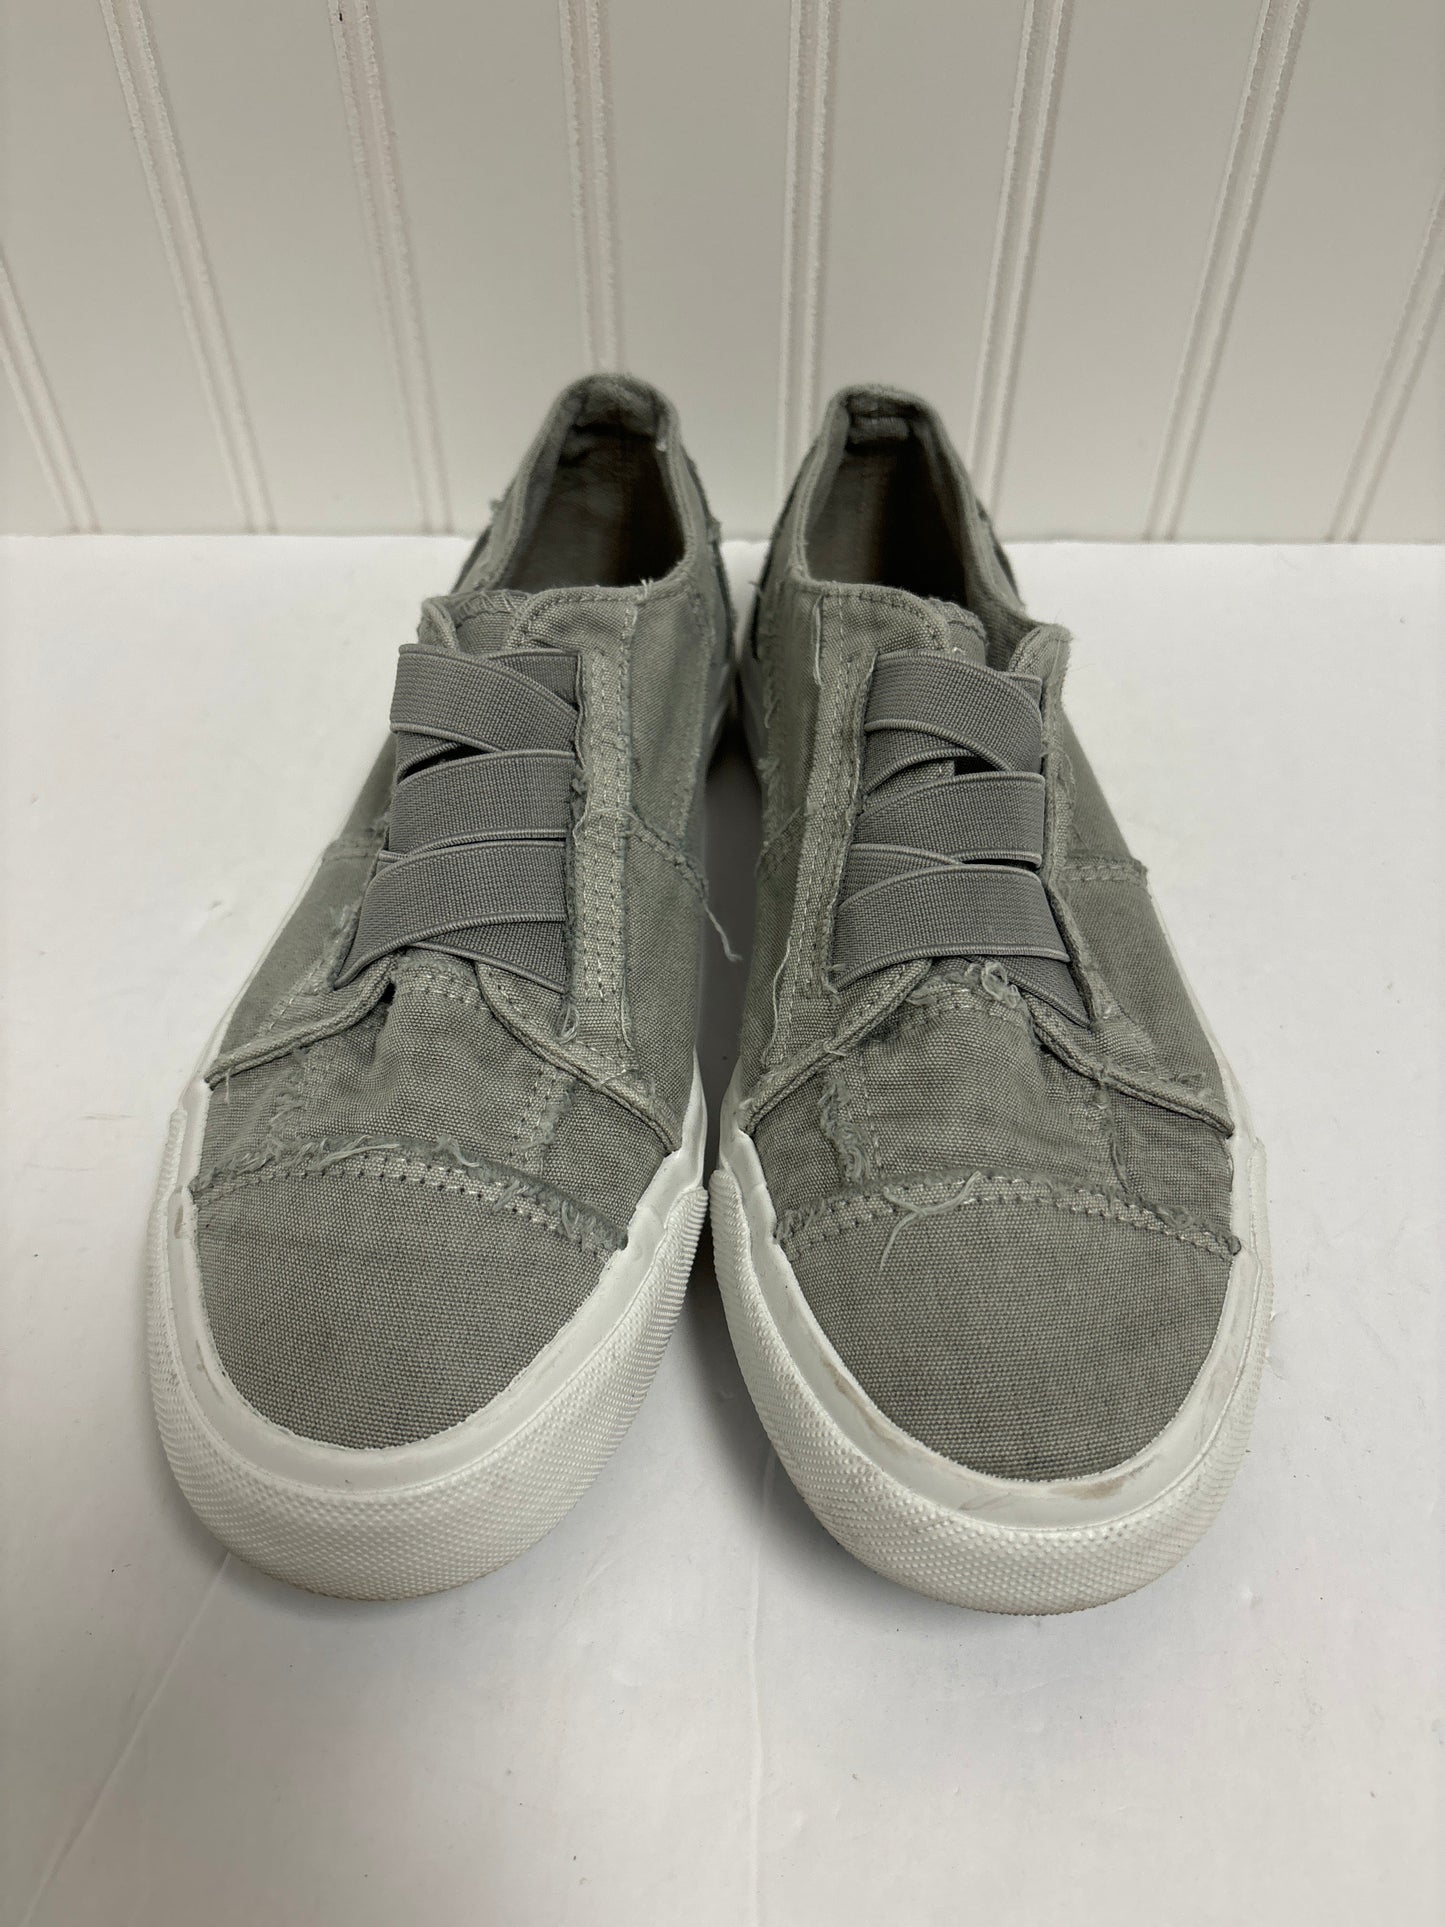 Grey Shoes Sneakers Blowfish, Size 7